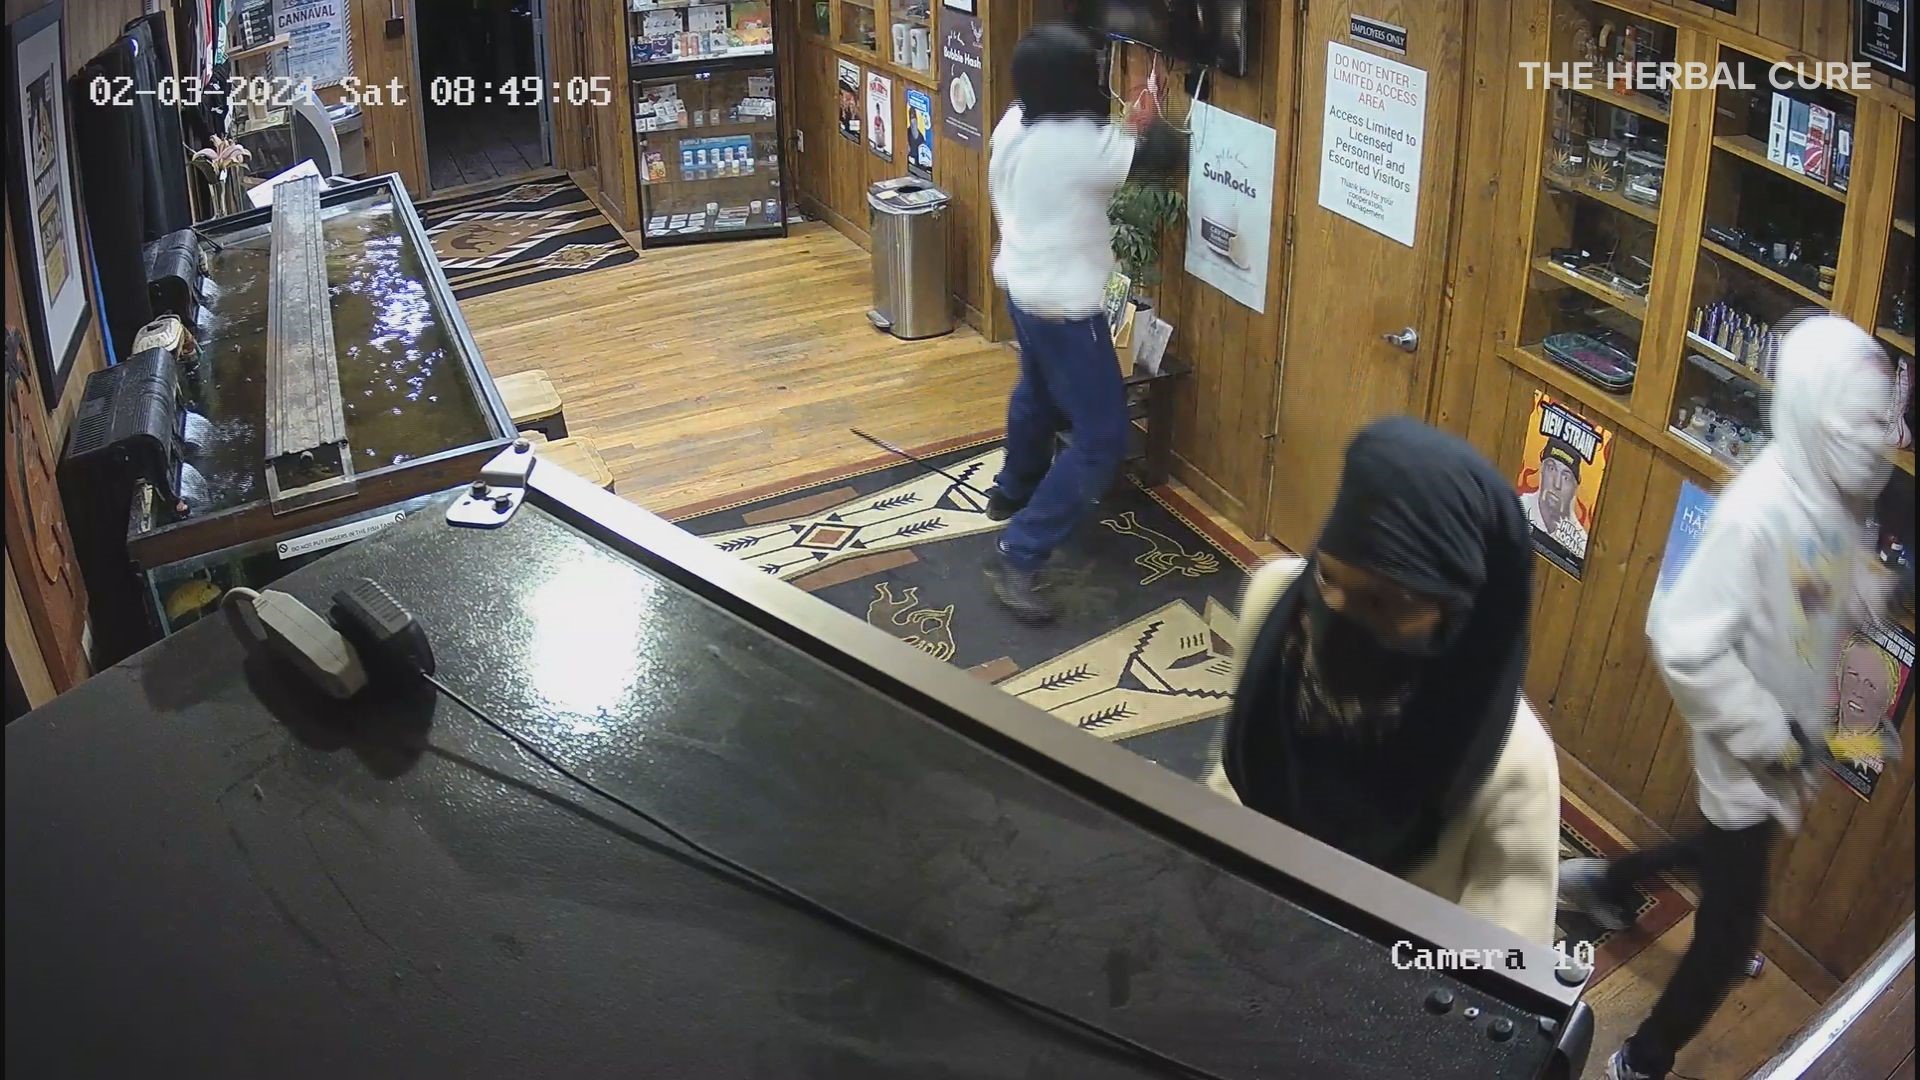 The owner of the Denver dispensary said that vandals broke into his shop twice over the weekend, causing roughly $50,000 in damage.